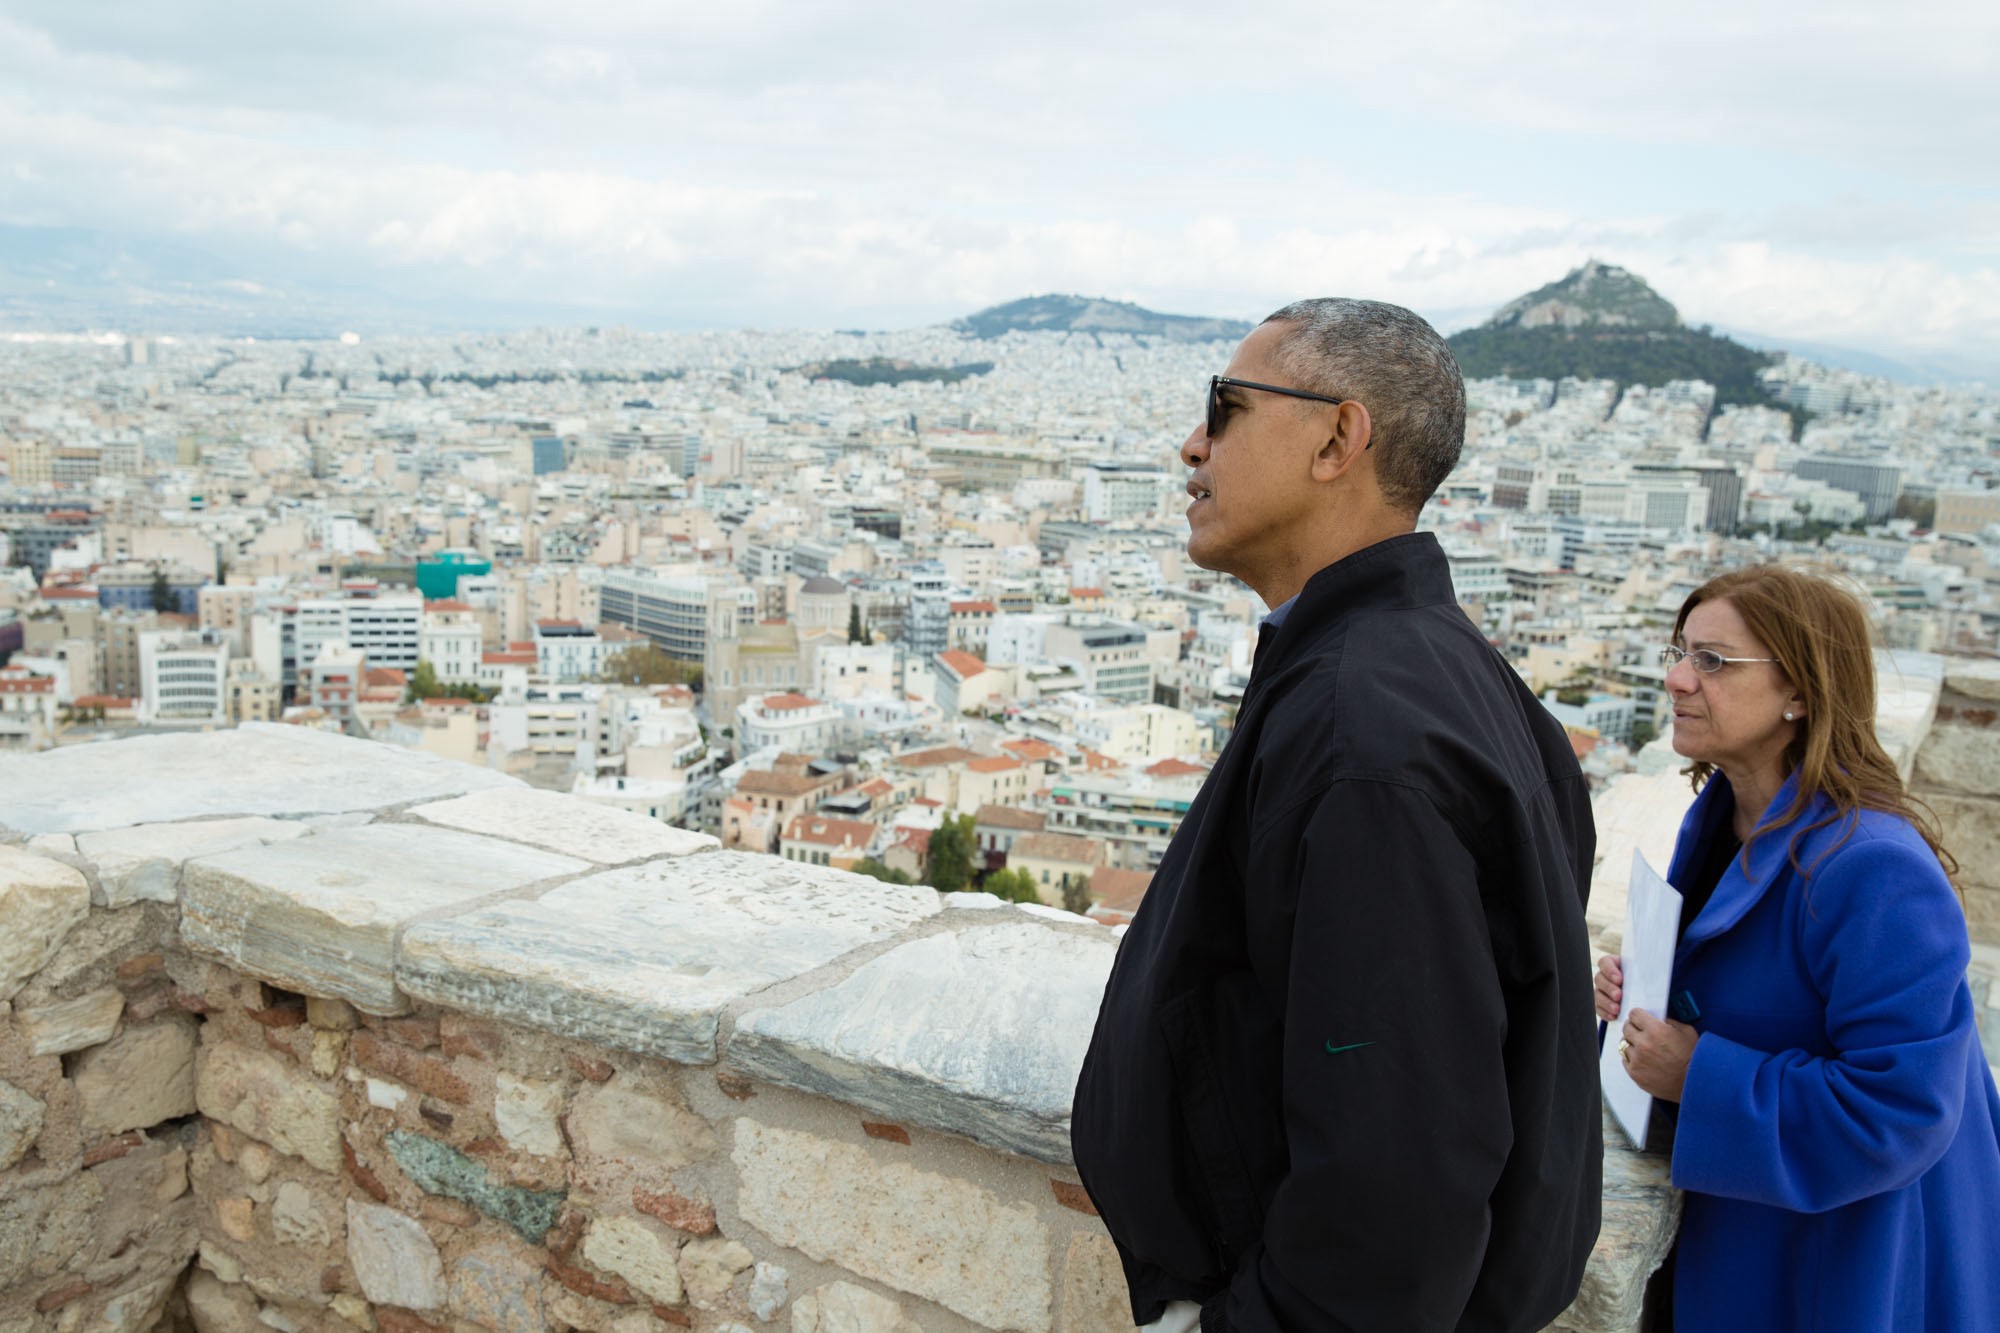  President Barack Obama looks at the view from Belvedere Tower during a tour of the Acropolis in Athens, Greece, Nov. 16, 2016. Dr. Eleni Banou, Director, Ephorate of Antiquities for Athens, Ministry of Culture, leads the tour. (Official White House Photo by Pete Souza)